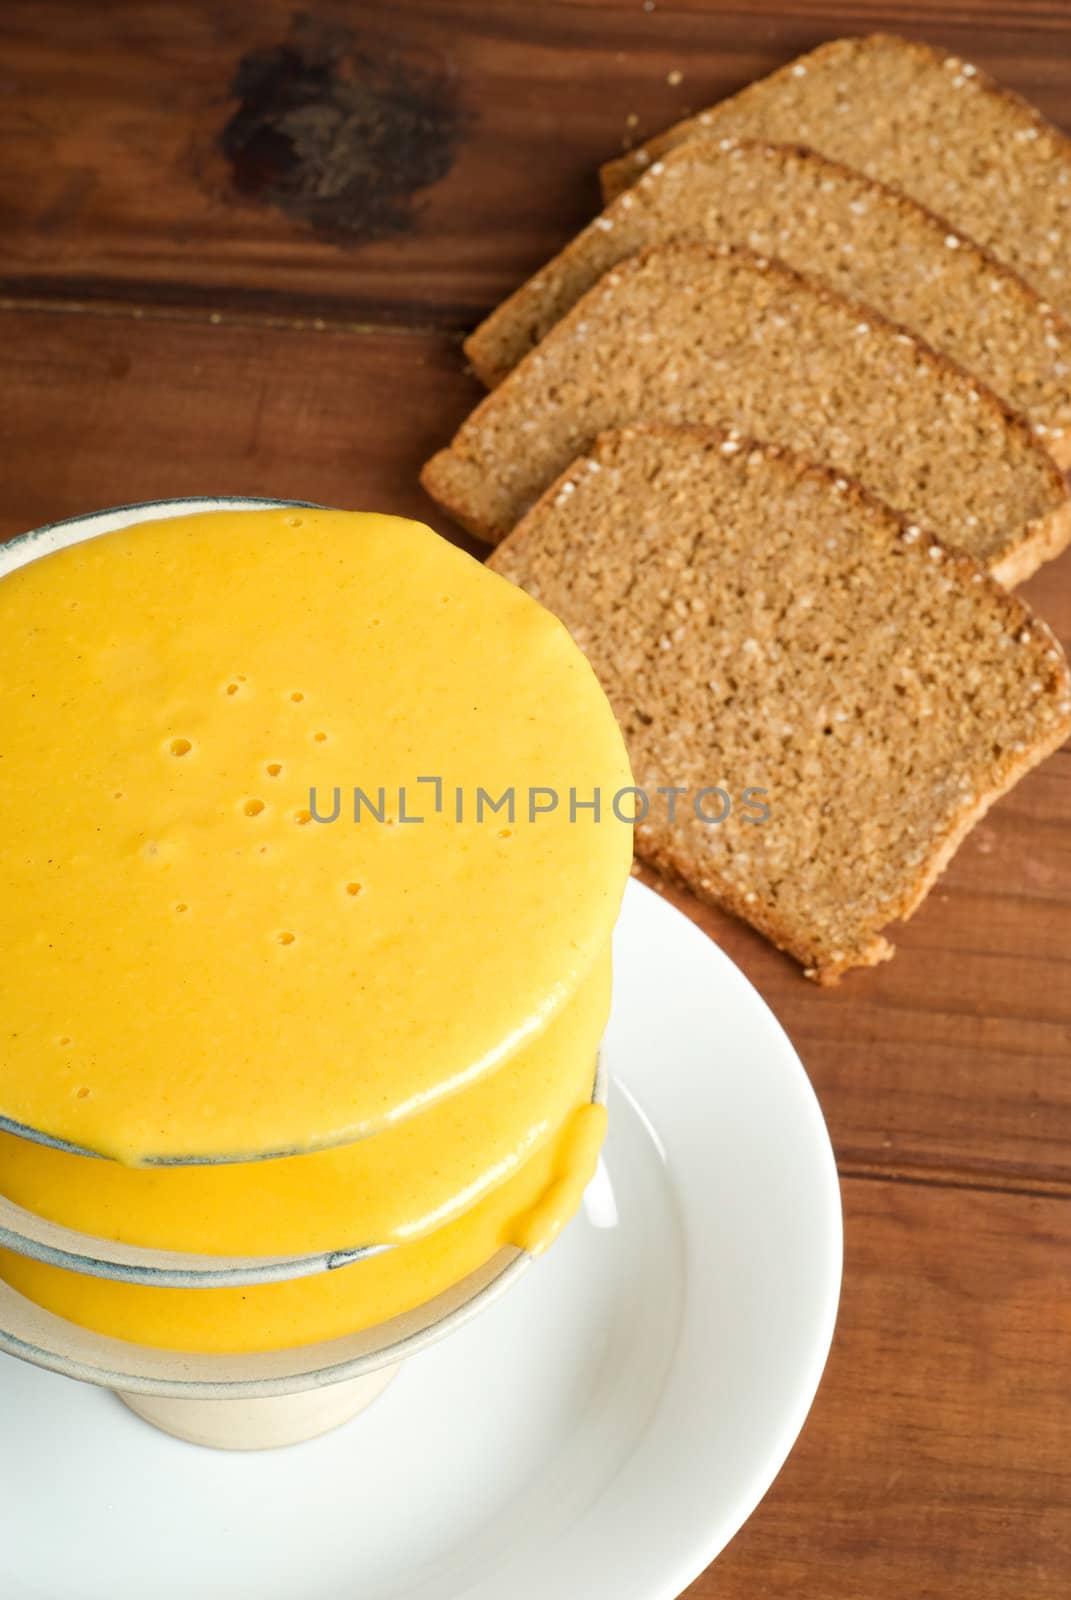 Butternut soup and rye bread by alistaircotton